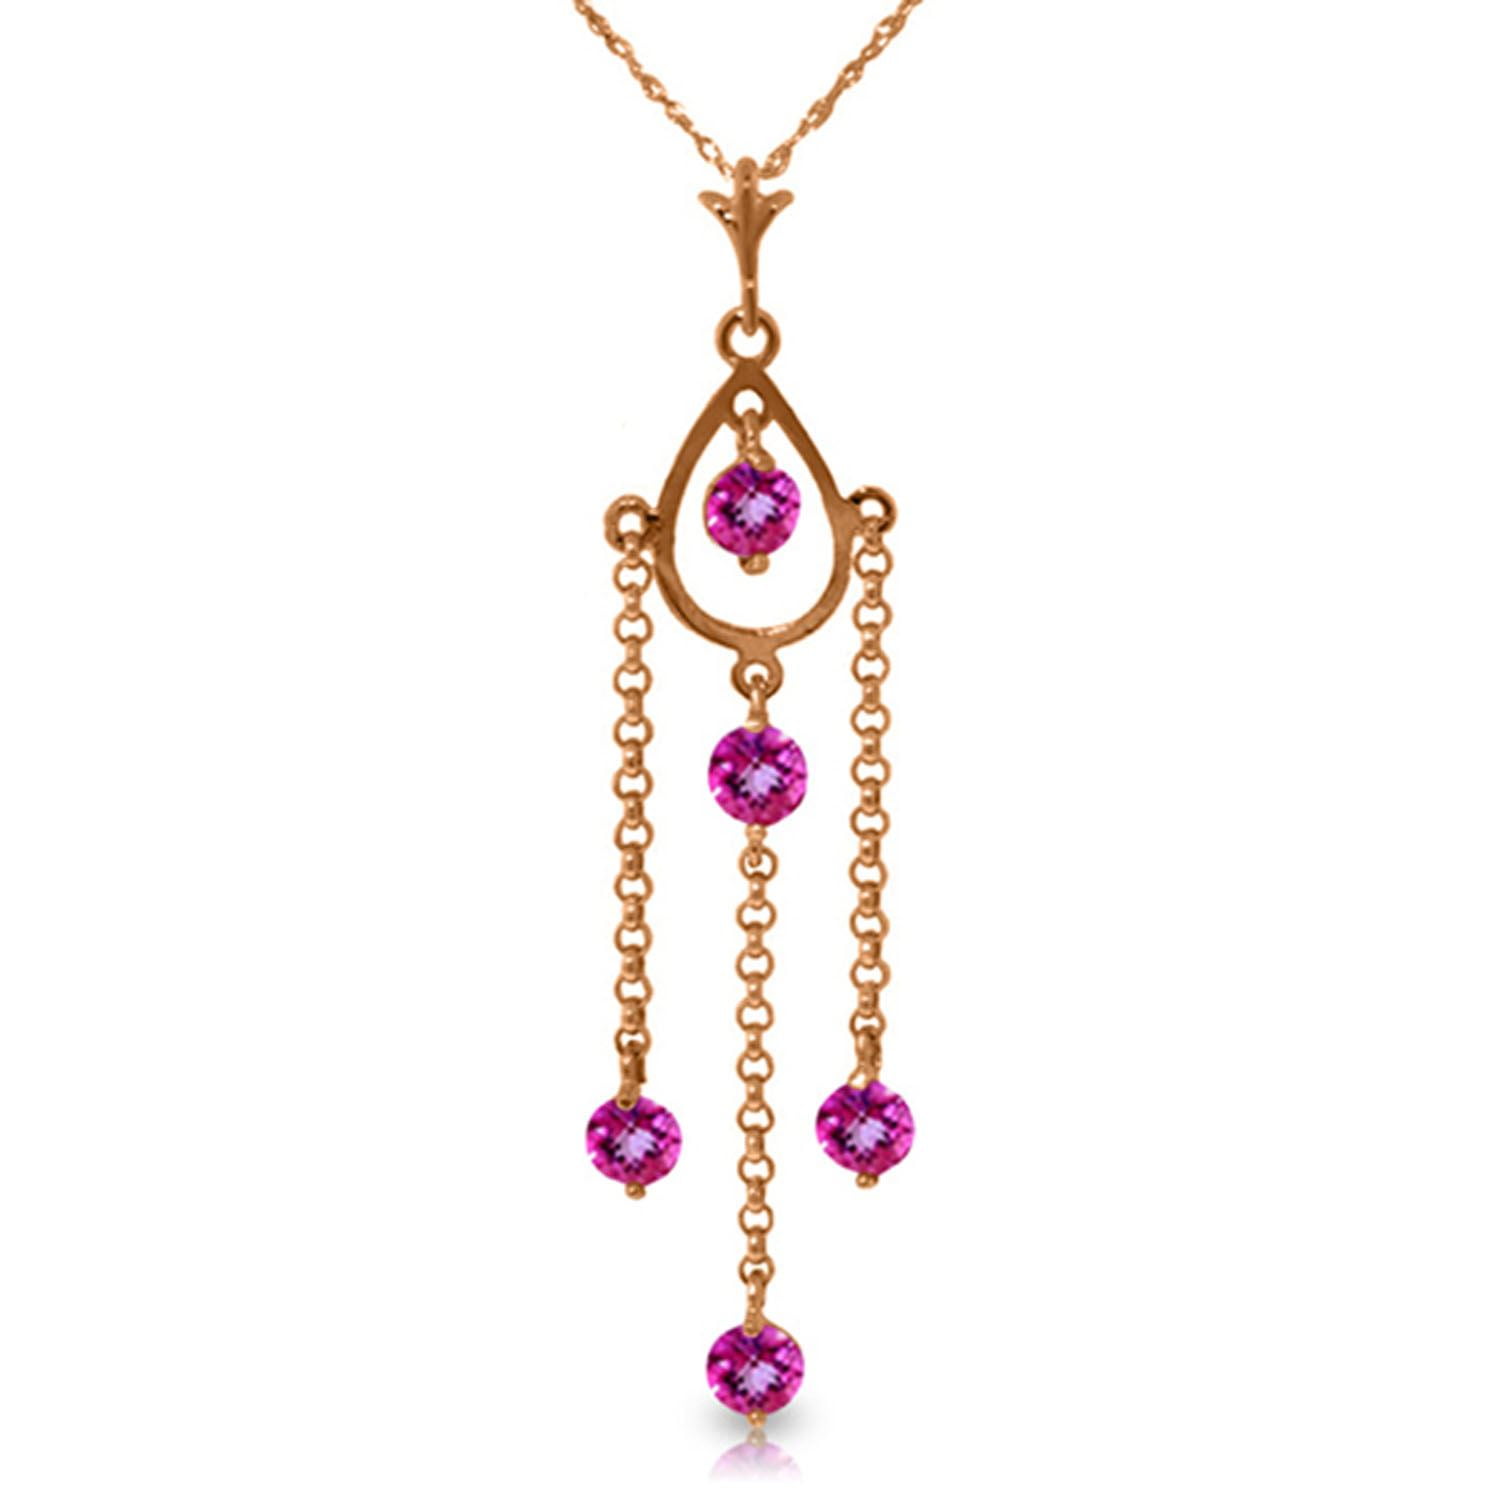 ALARRI 3.6 Carat 14K Solid Rose Gold Necklace Natural Pink Topaz with 22 Inch Chain Length